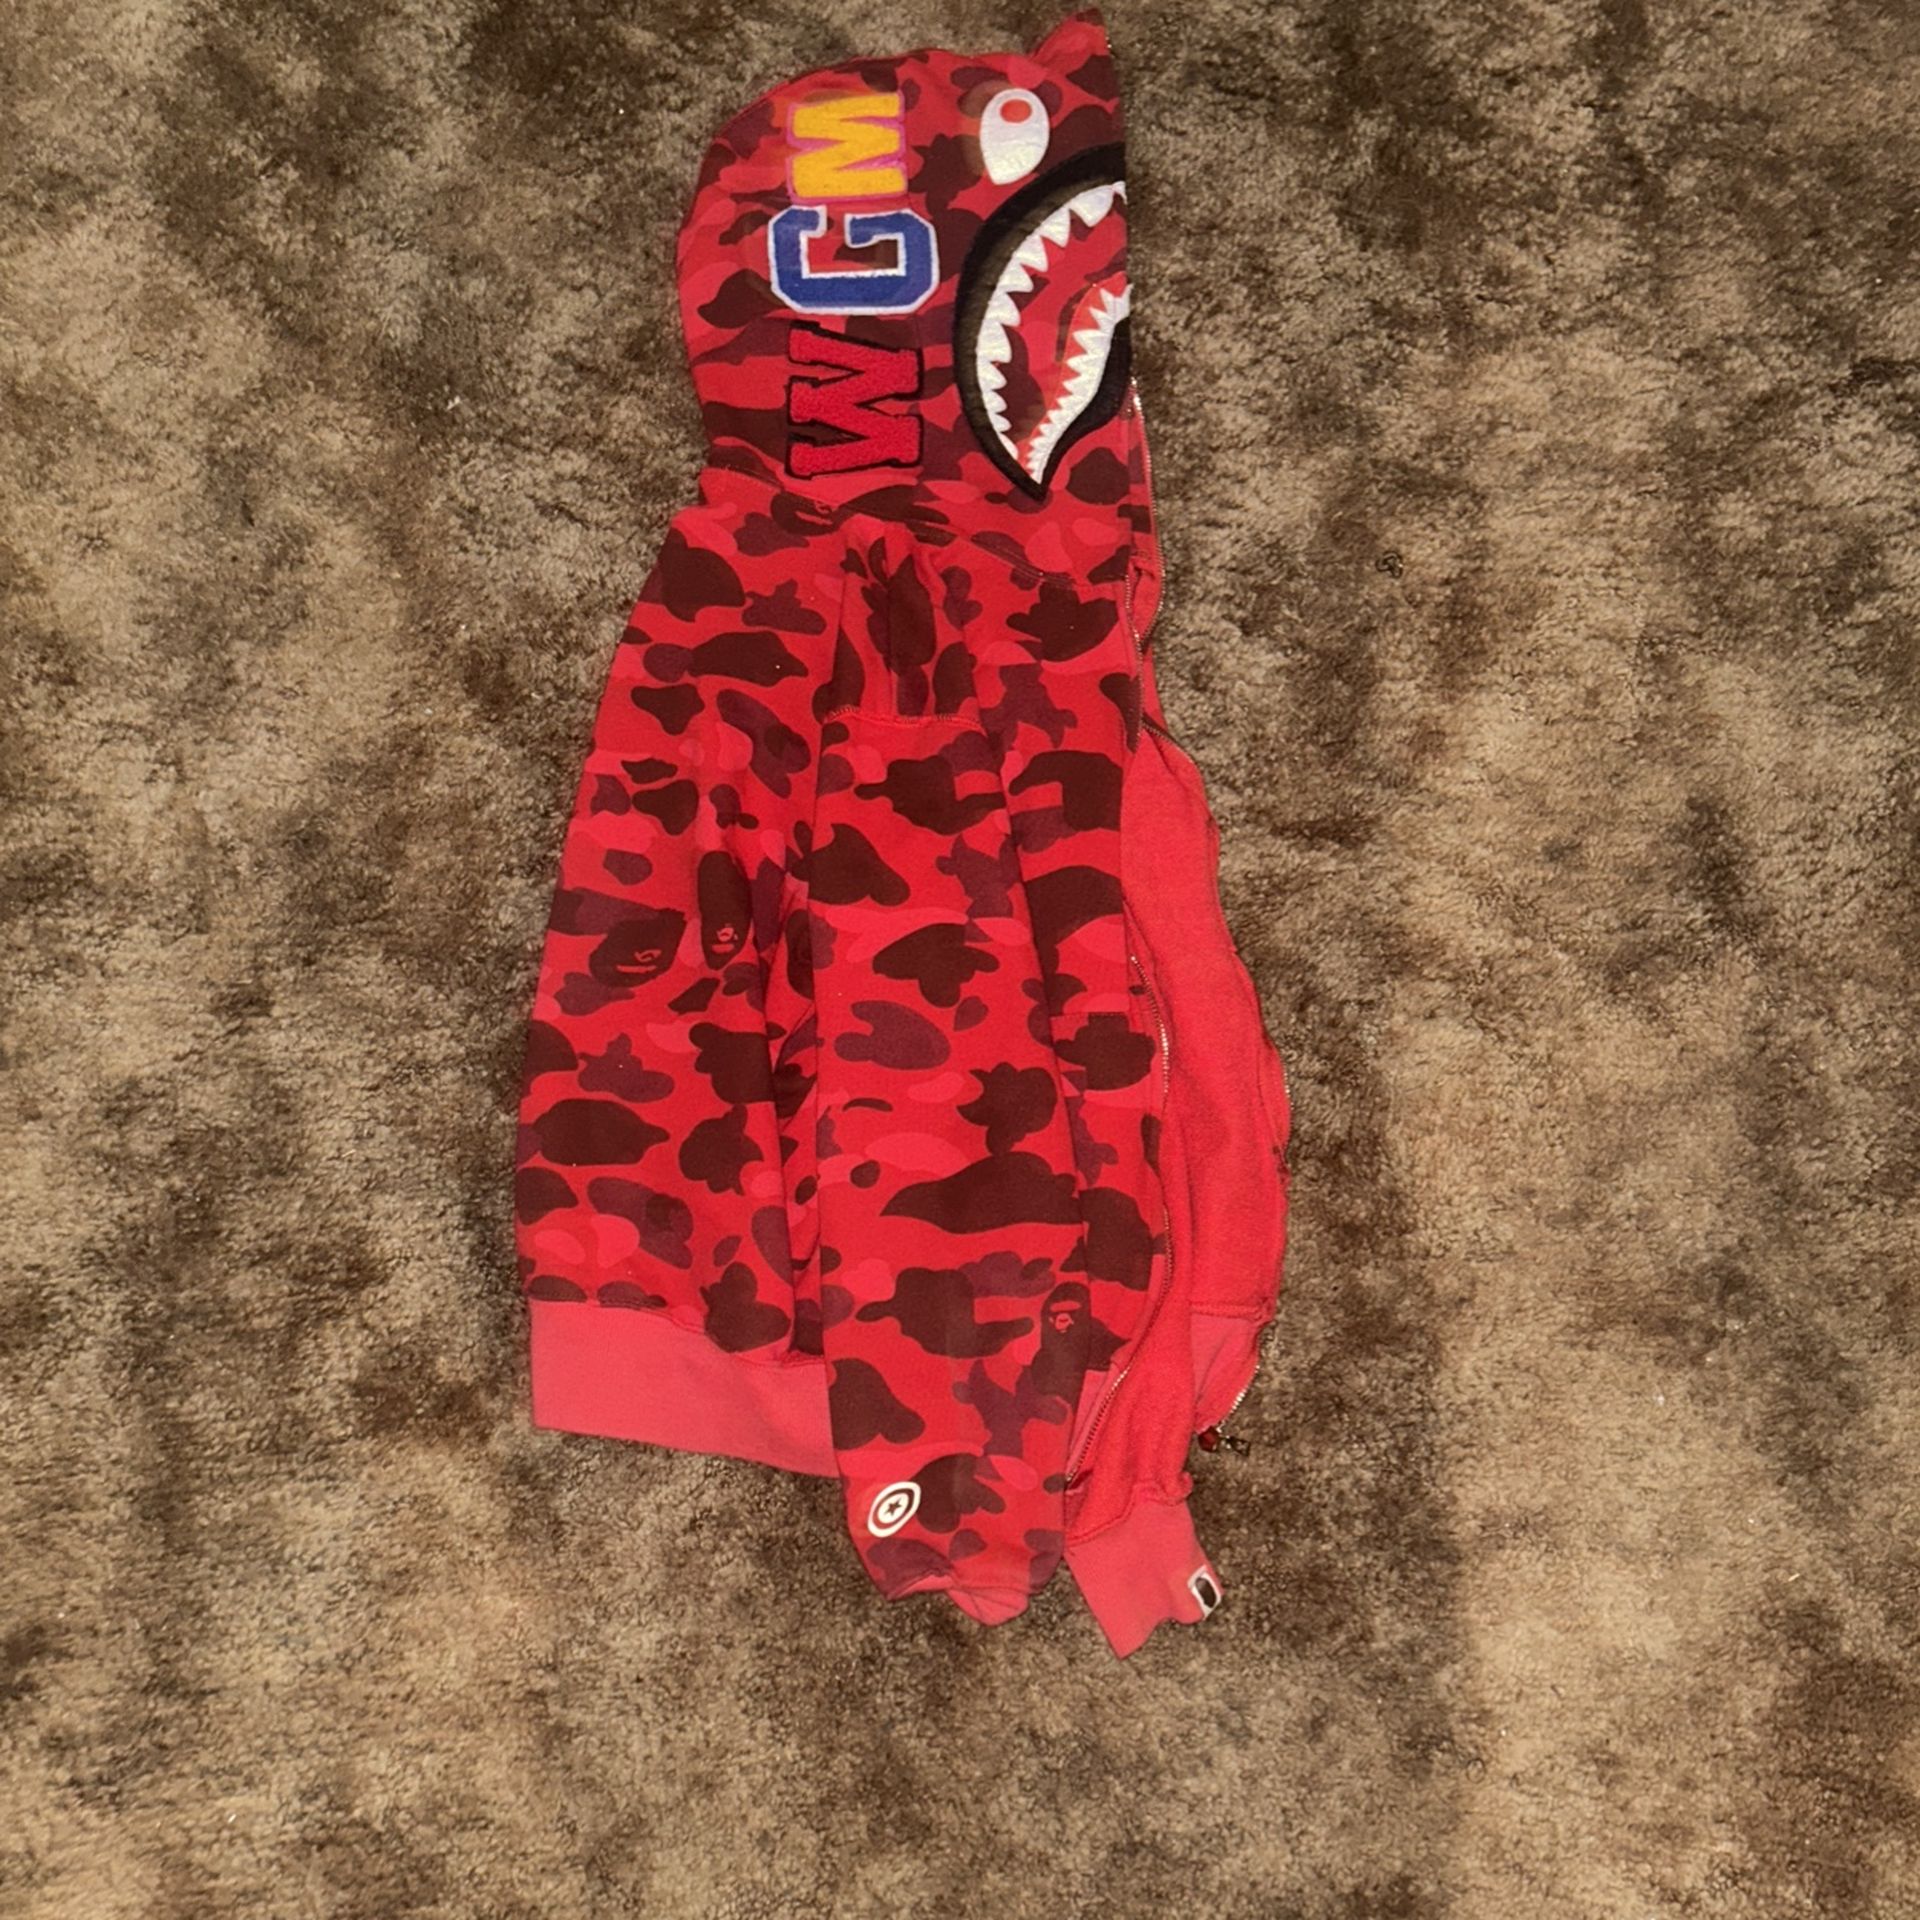 Red bape jacket size small